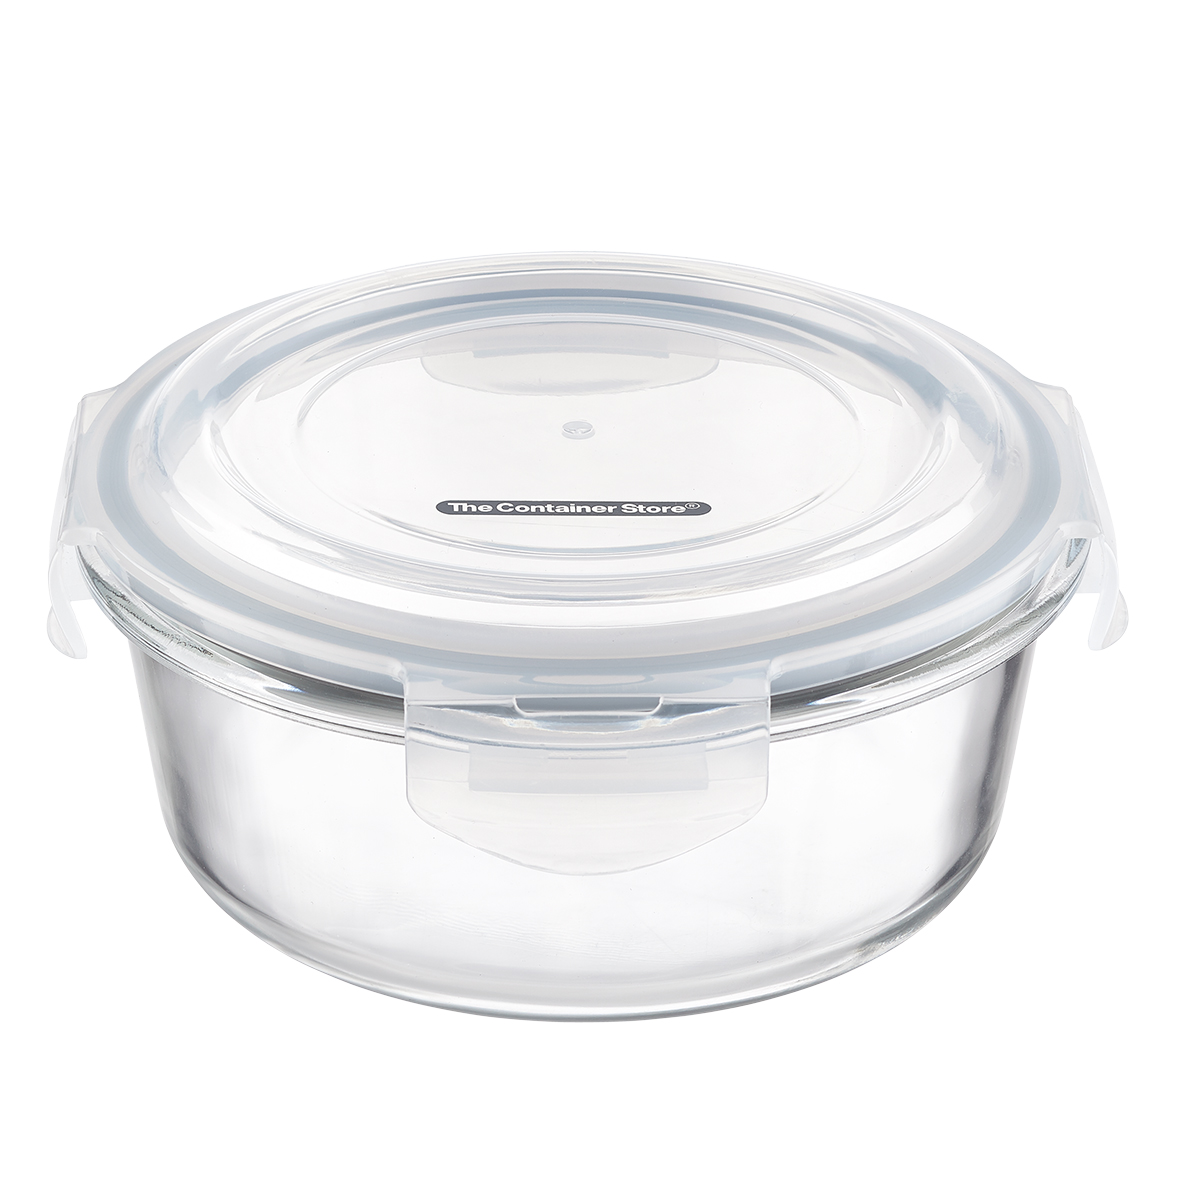 https://www.containerstore.com/catalogimages/383230/10078991-borosilicate-food-storage-r.jpg